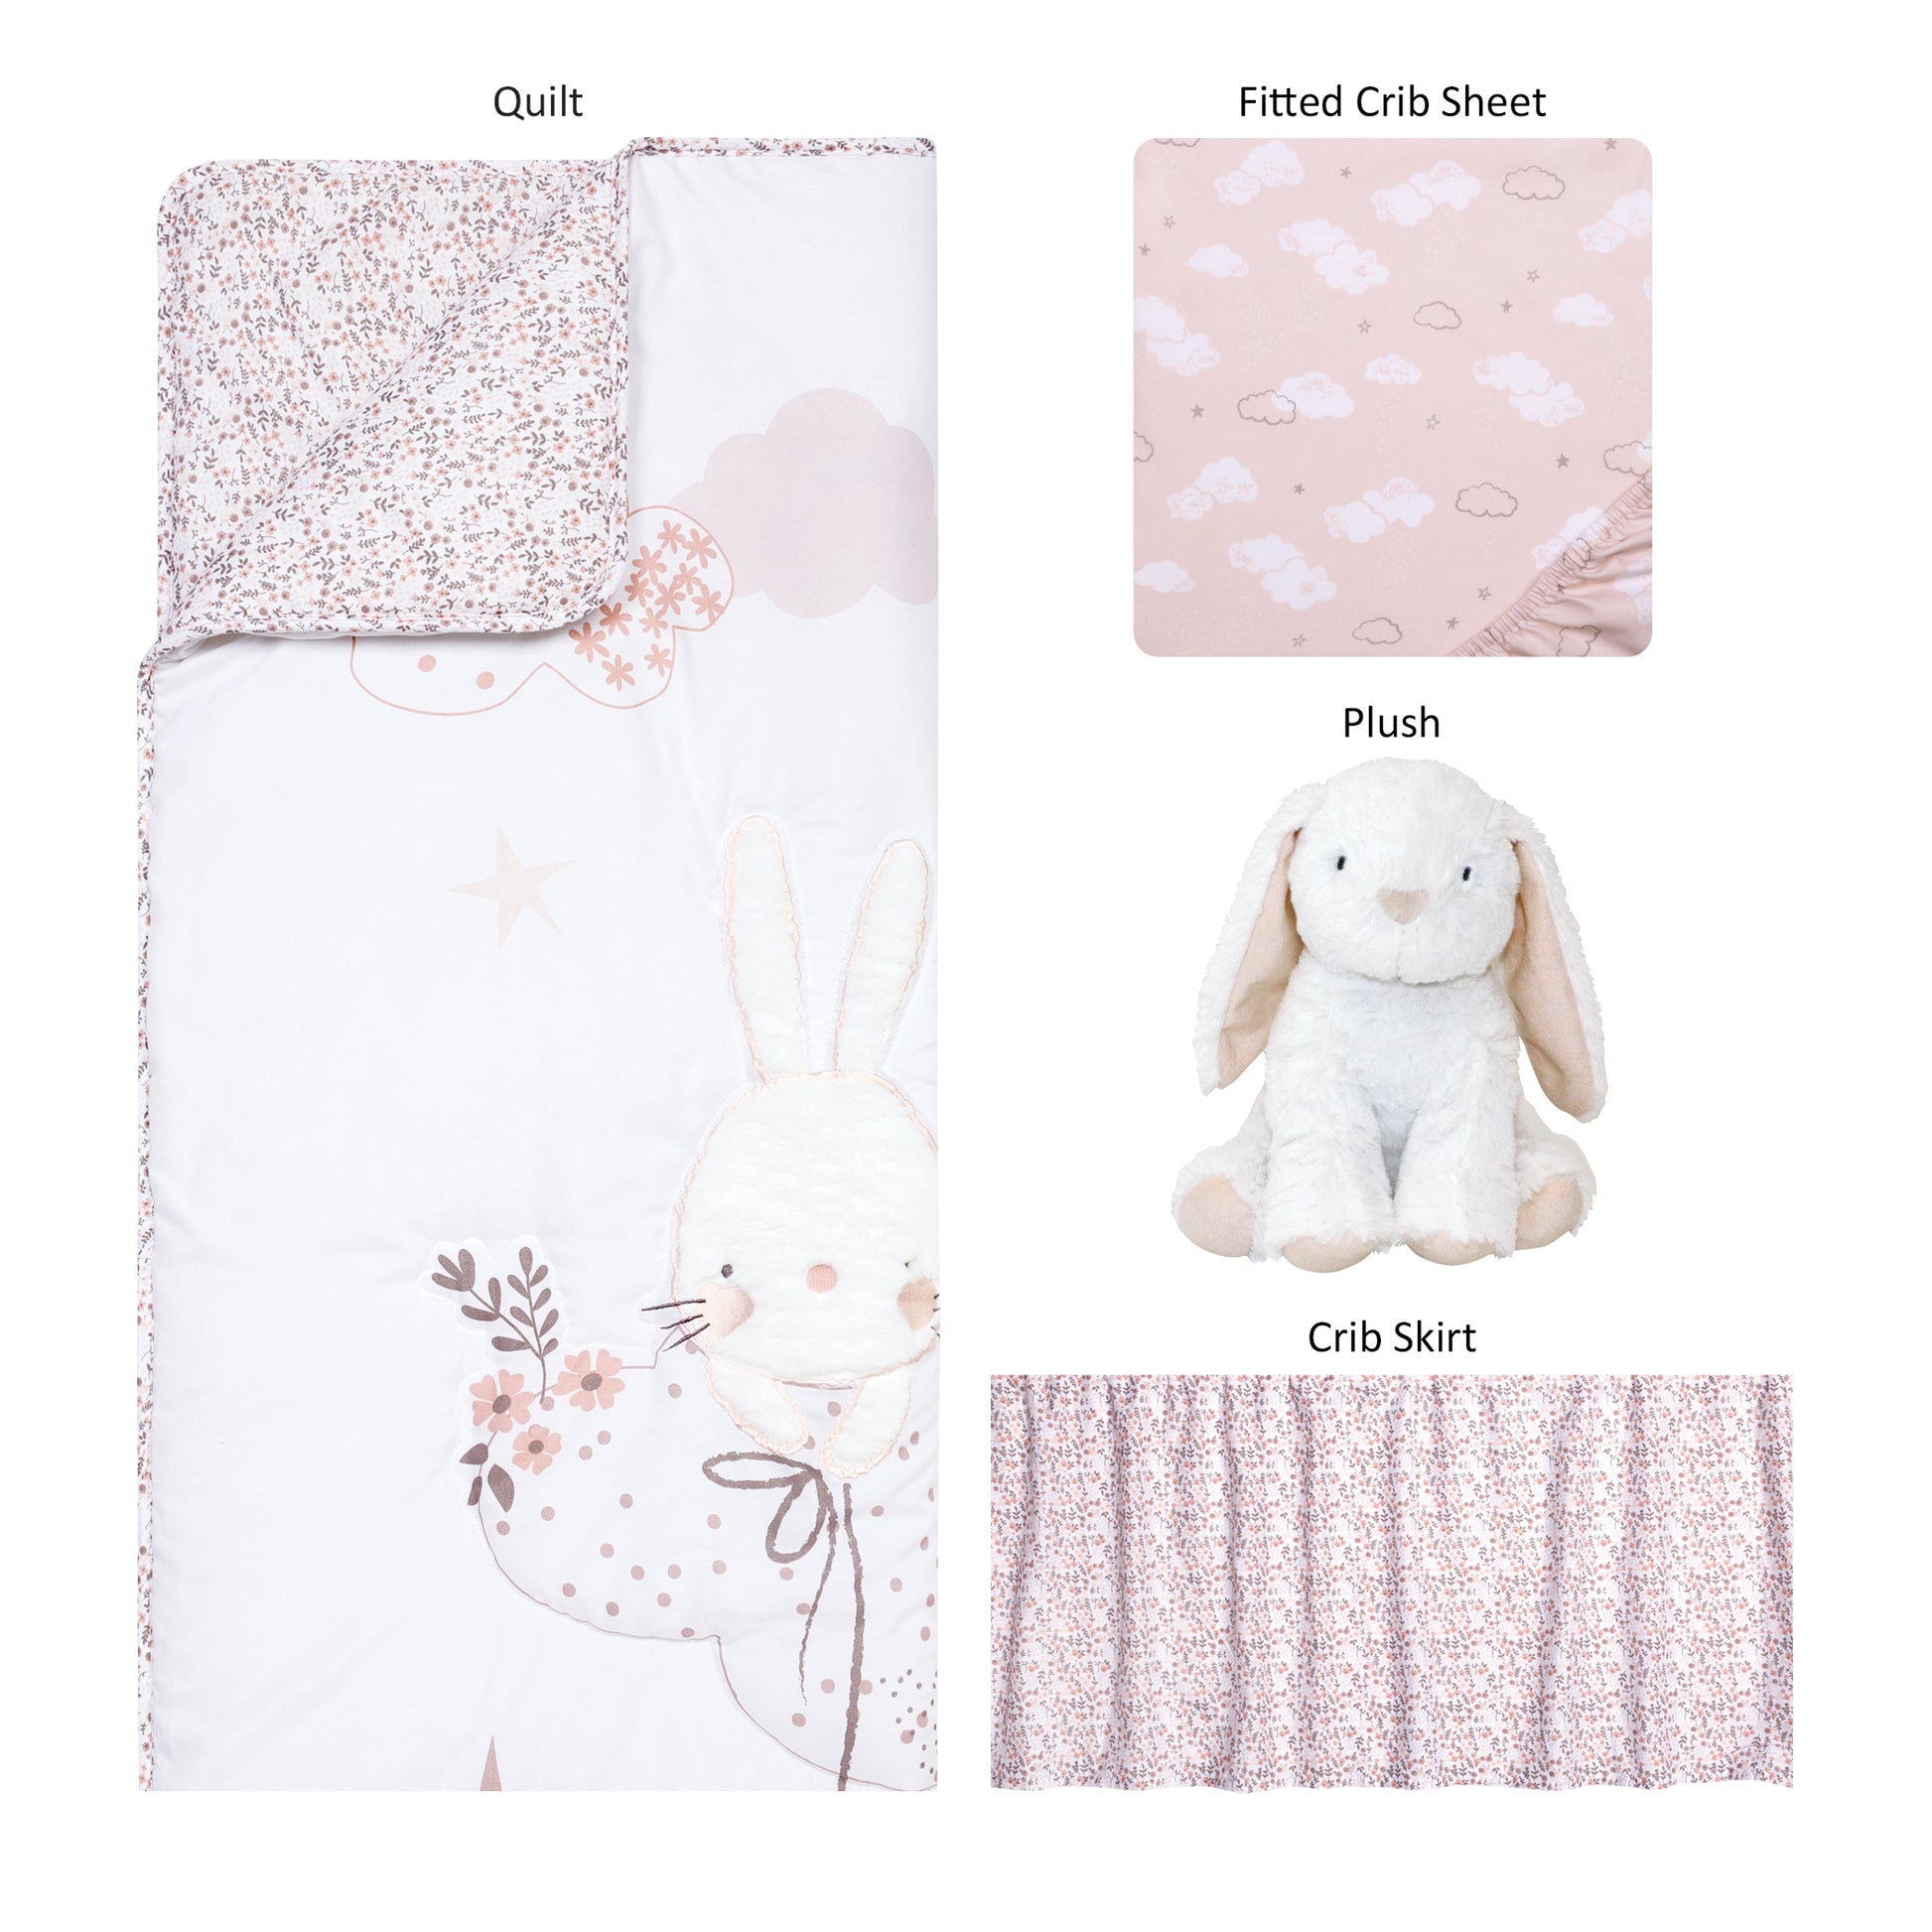  Sammy and Lou Cottontail Cloud 4 Piece Crib Bedding Set ; pieces laid out includes crib bedding, crib sheet, crib skirt and bunny plush toy